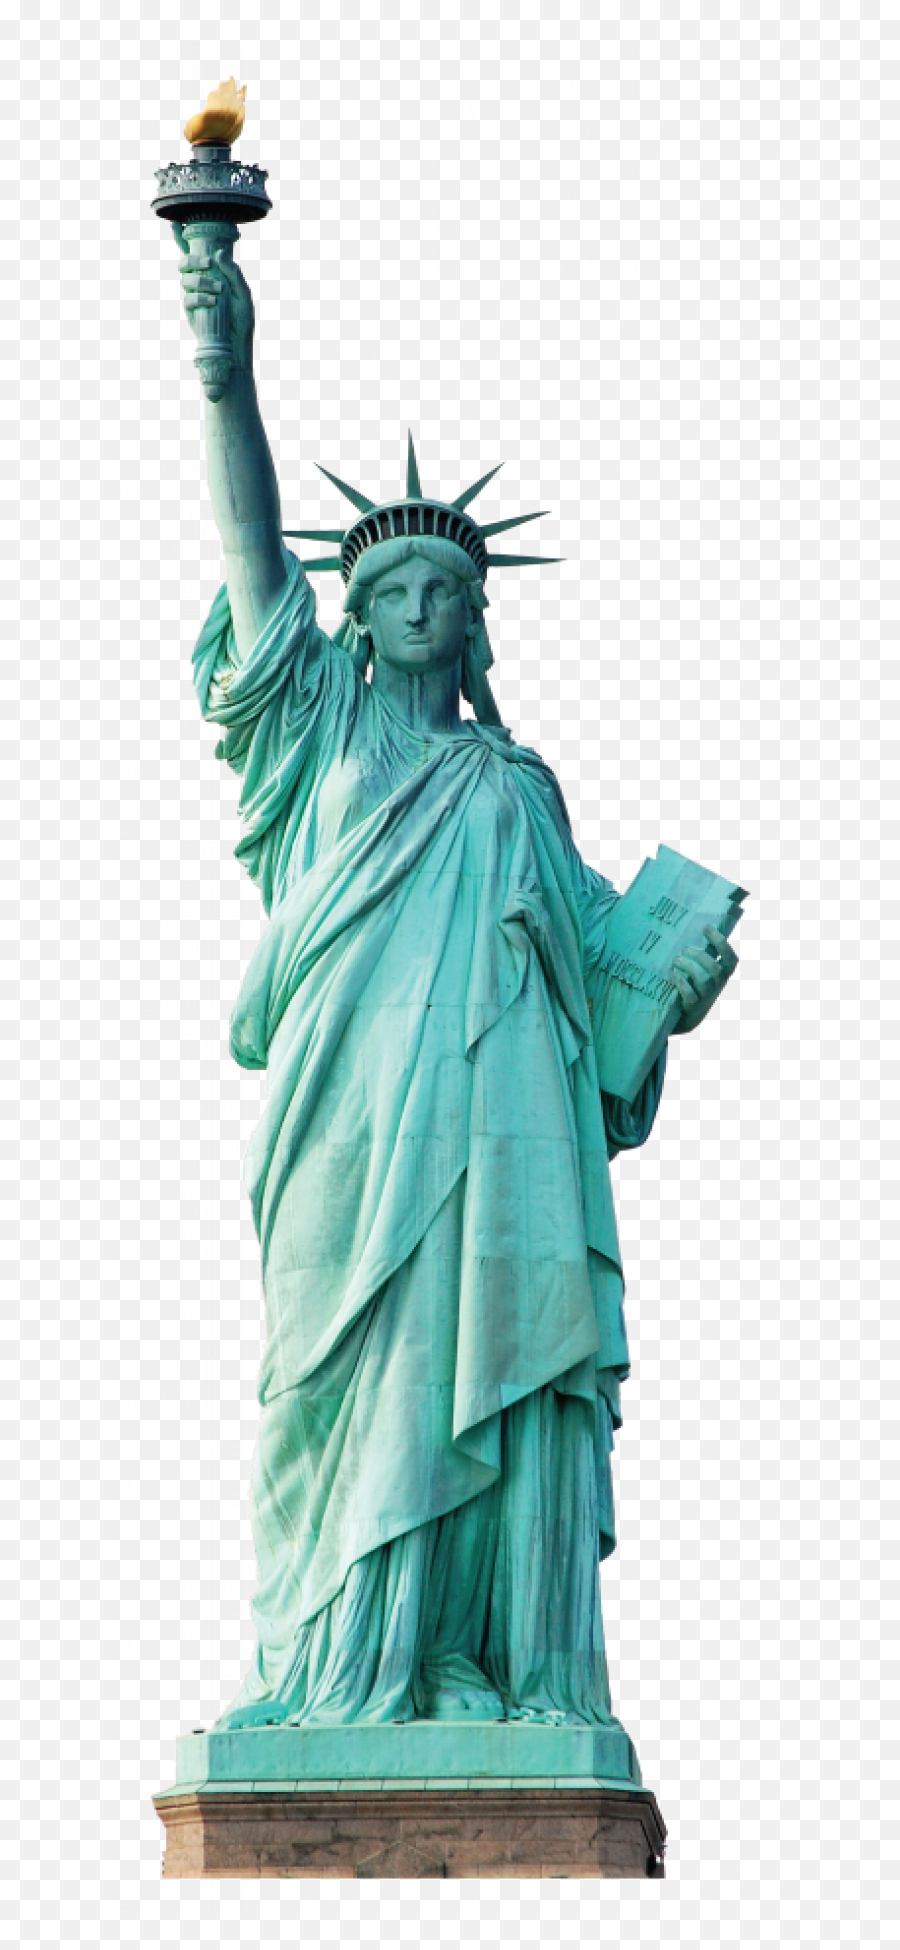 Clipart Park Statue - Statue Of Liberty Hd Png,Statue Of Liberty Silhouette Png